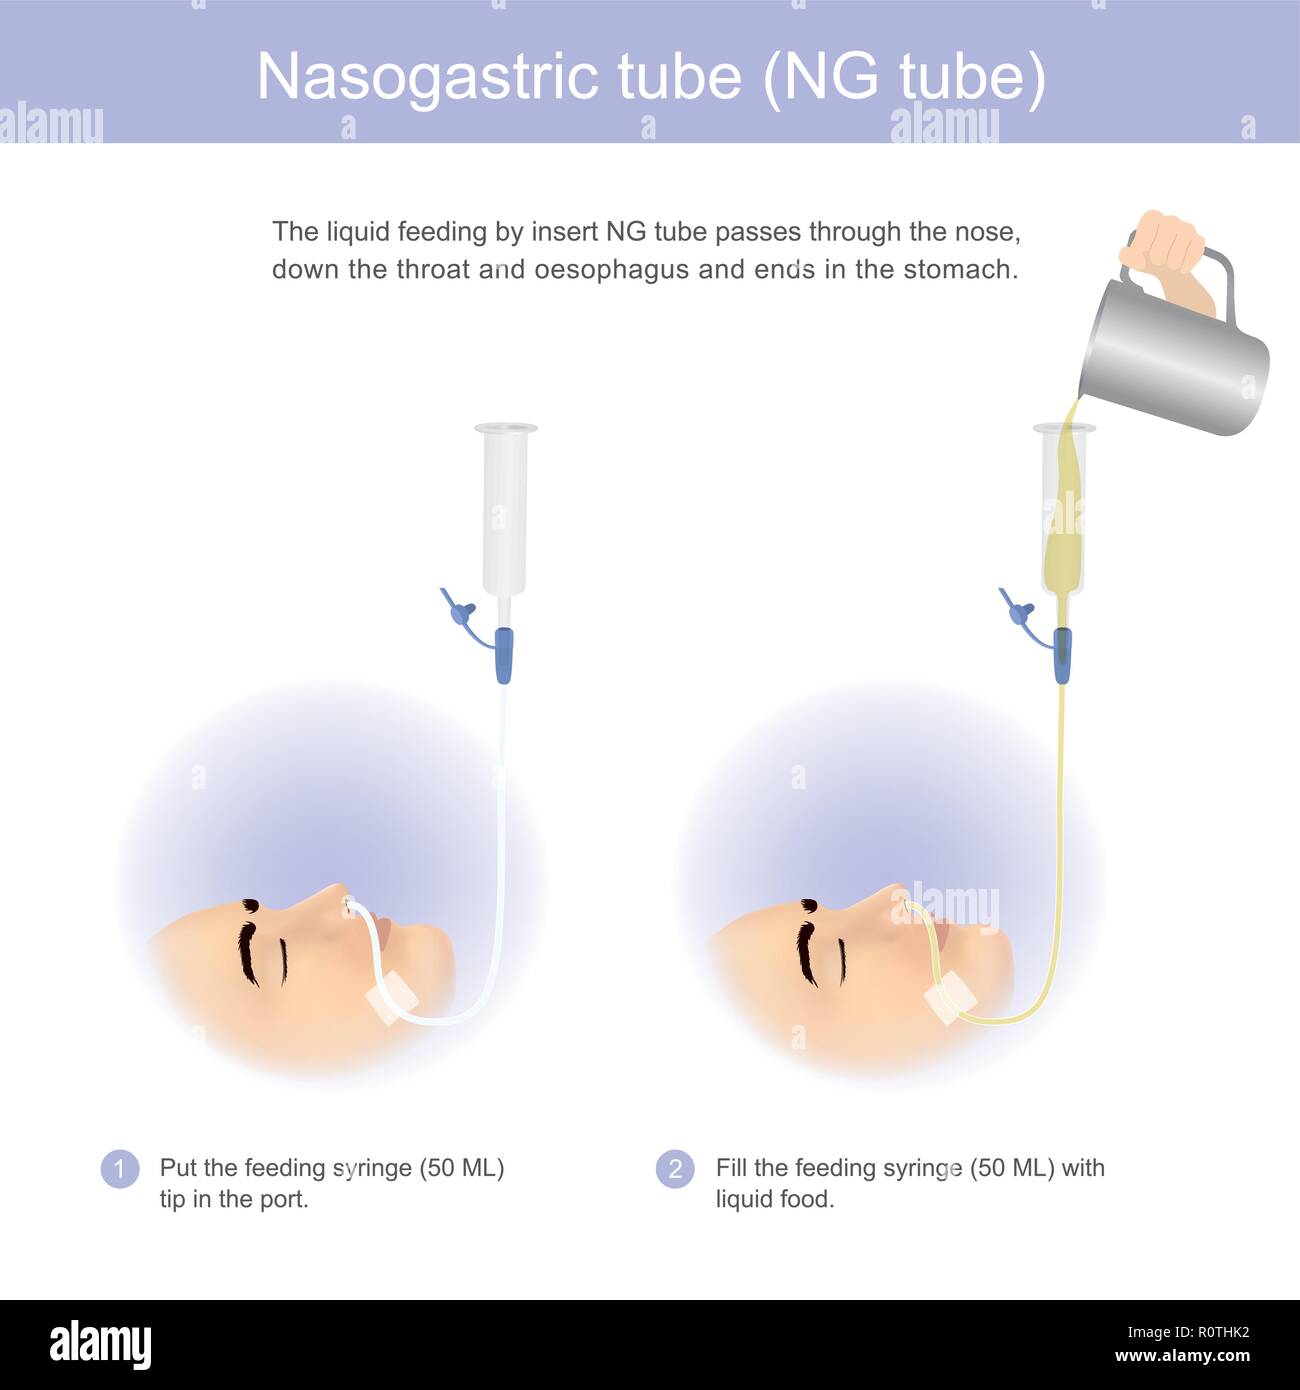 The liquid feeding by insert NG tube passes through the nose, down the throat and oesophagus and ends in the stomach. Illustration graphic. Stock Vector